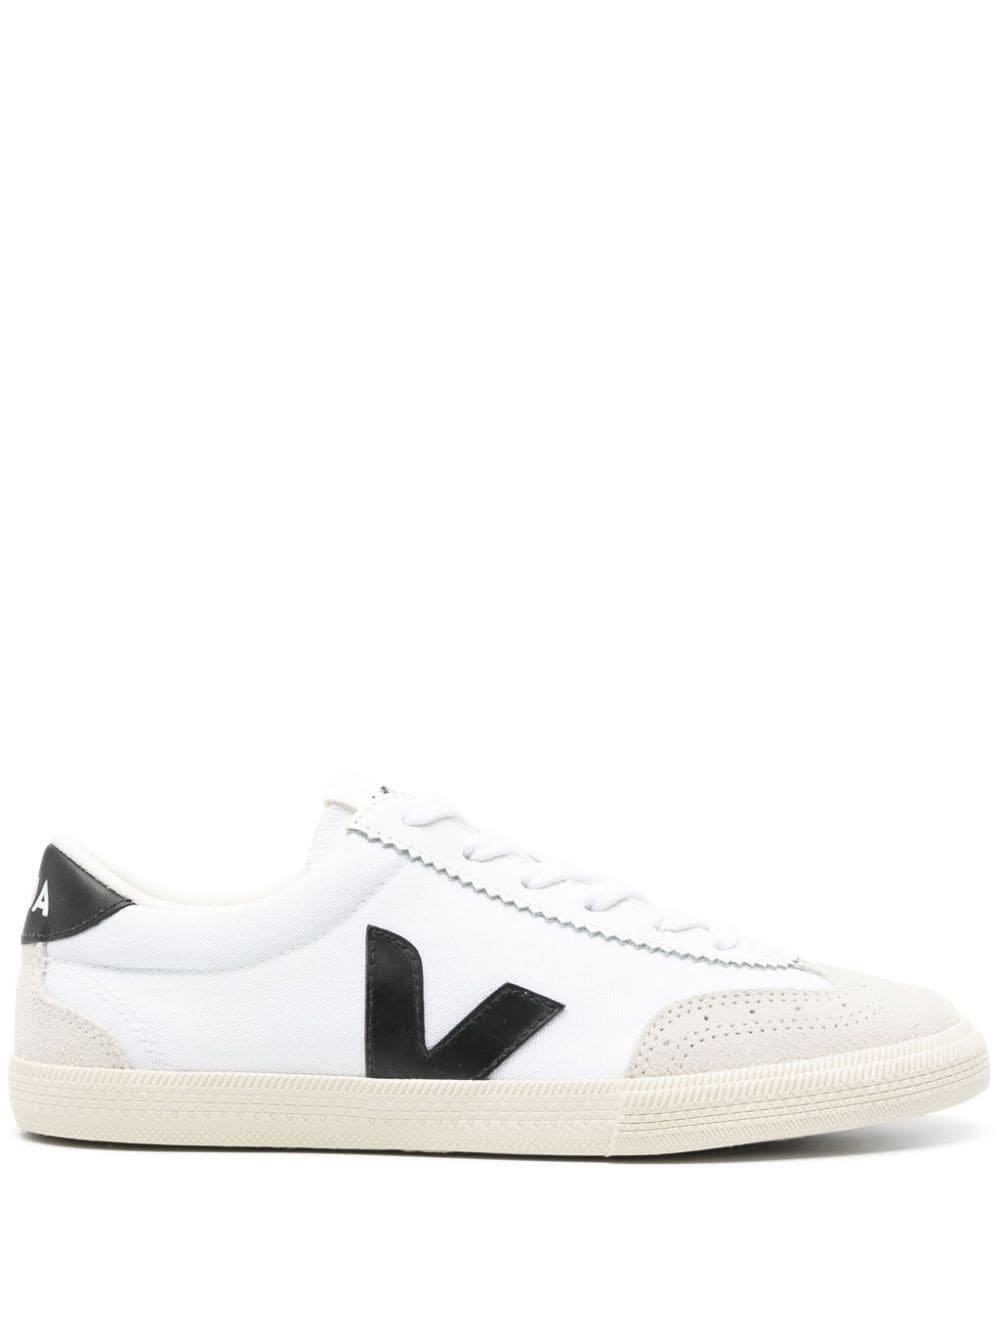 Volley Canvas Sneakers in White_Black